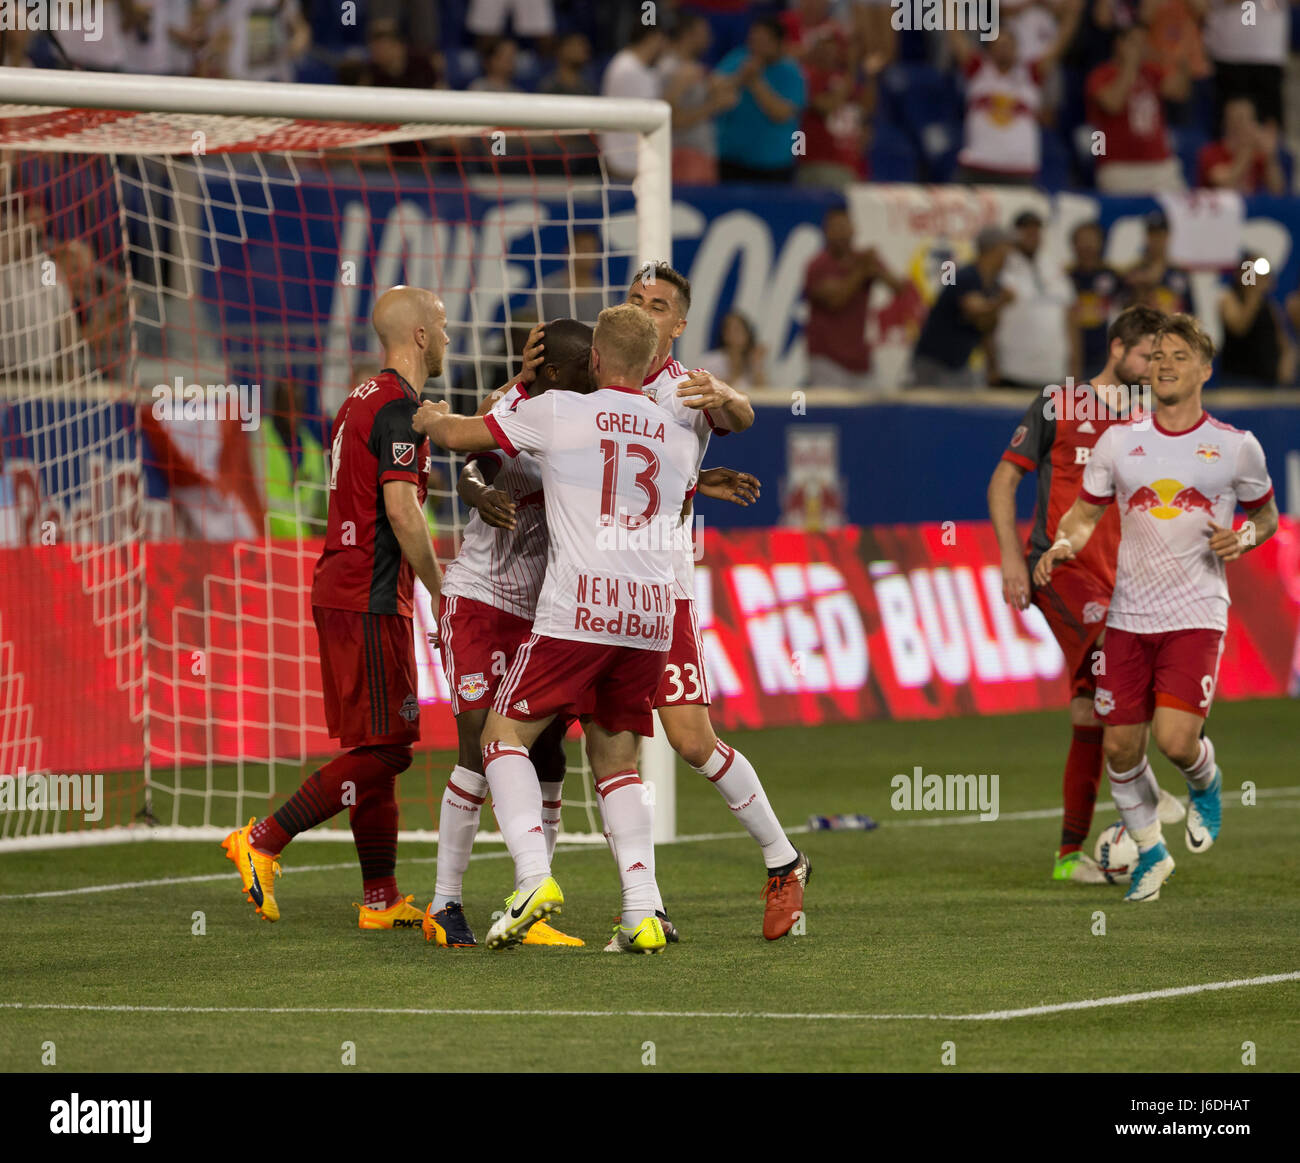 April 27, 2019 - Harrison, New Jersey, U.S. - New York Red Bulls goalkeeper  Luis Robles (31) in action during a MLS match between the FC Cincinnati and  the New York Red